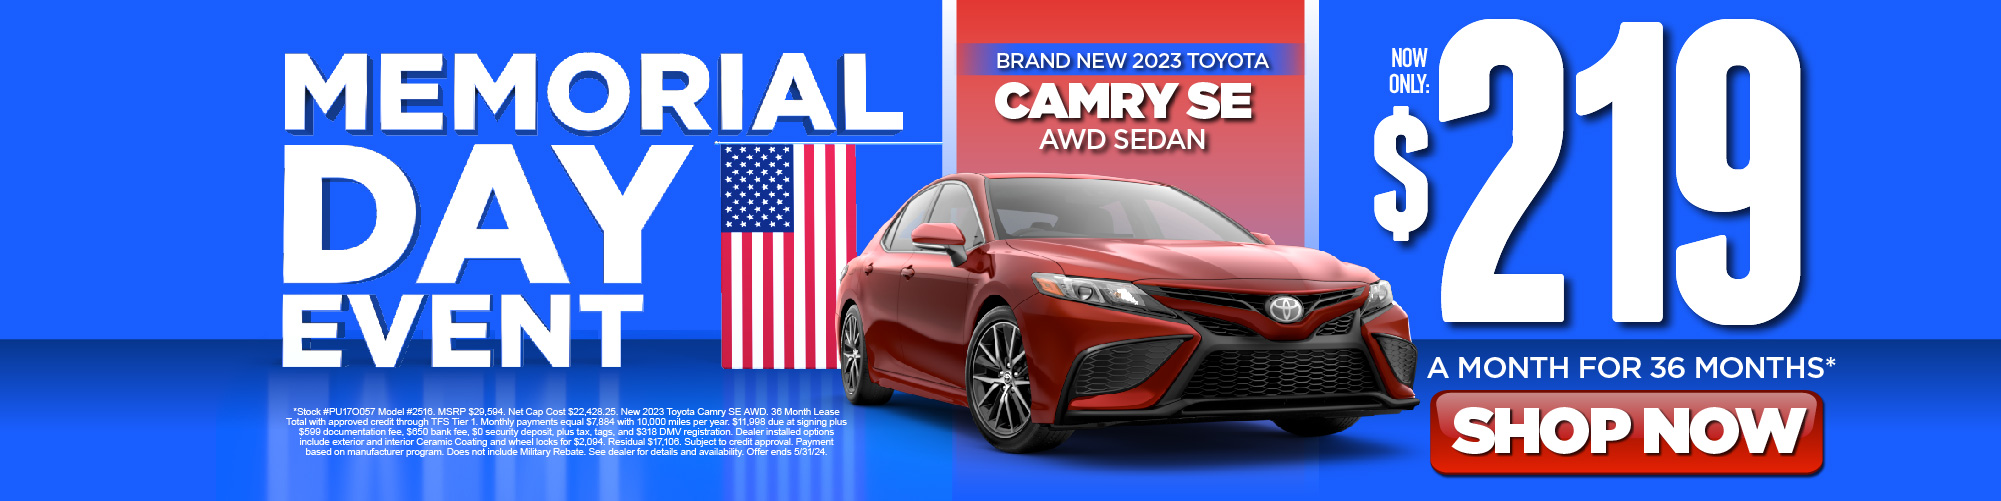 PRE OWNED SPECIAL USED 2019 Toyota Camry LE Sedan | $289 a month for 36 months*